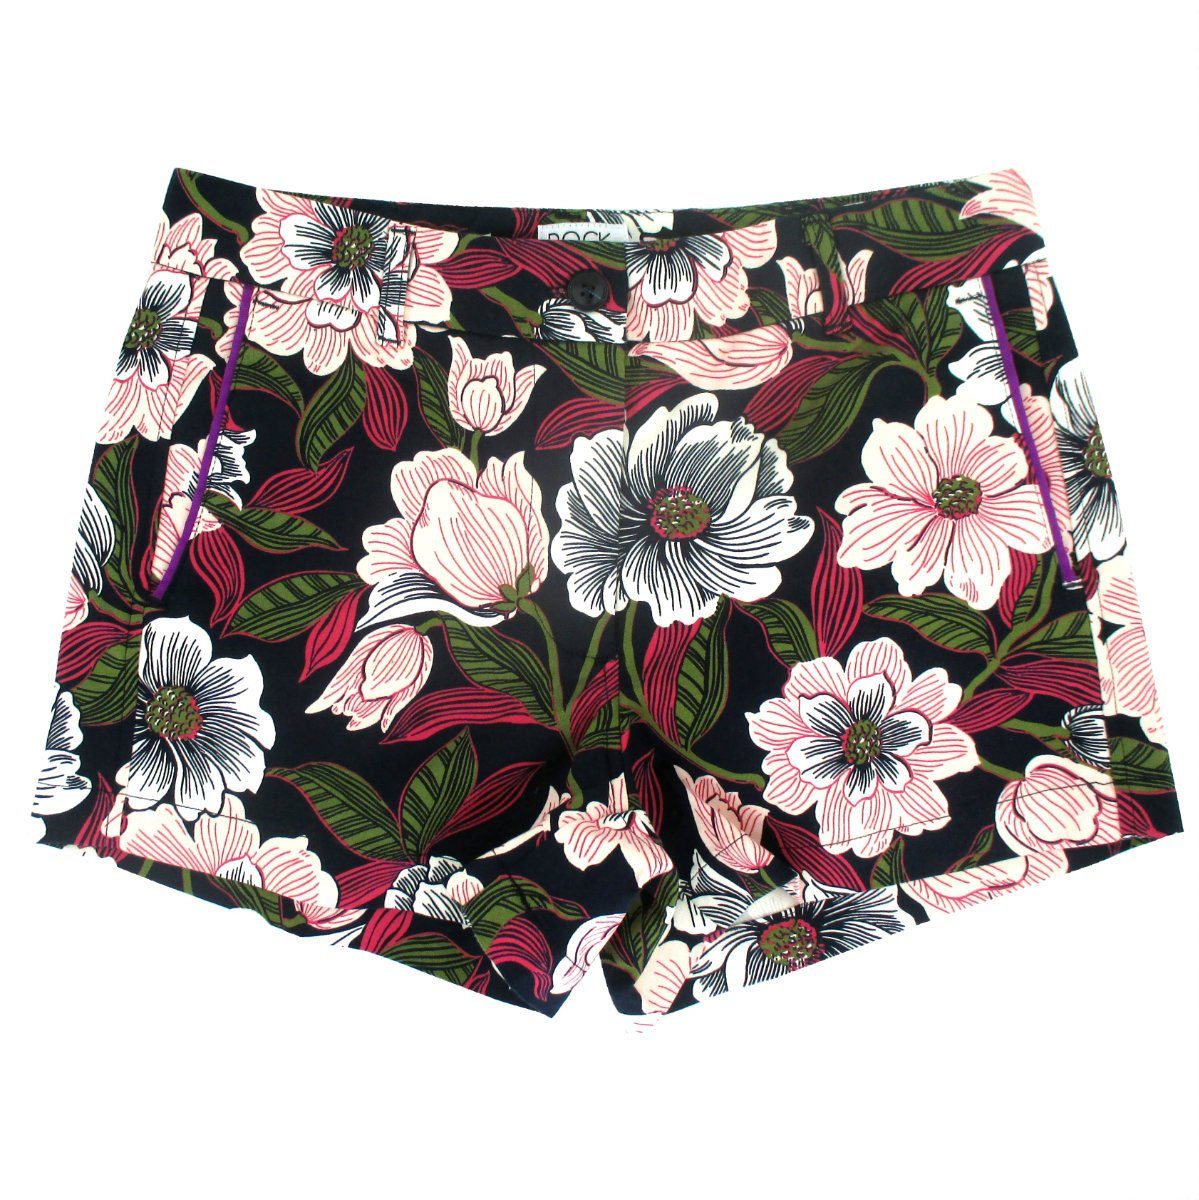 Floral Flower All Over Print Summer Chinos Bermudas Shorts for Women